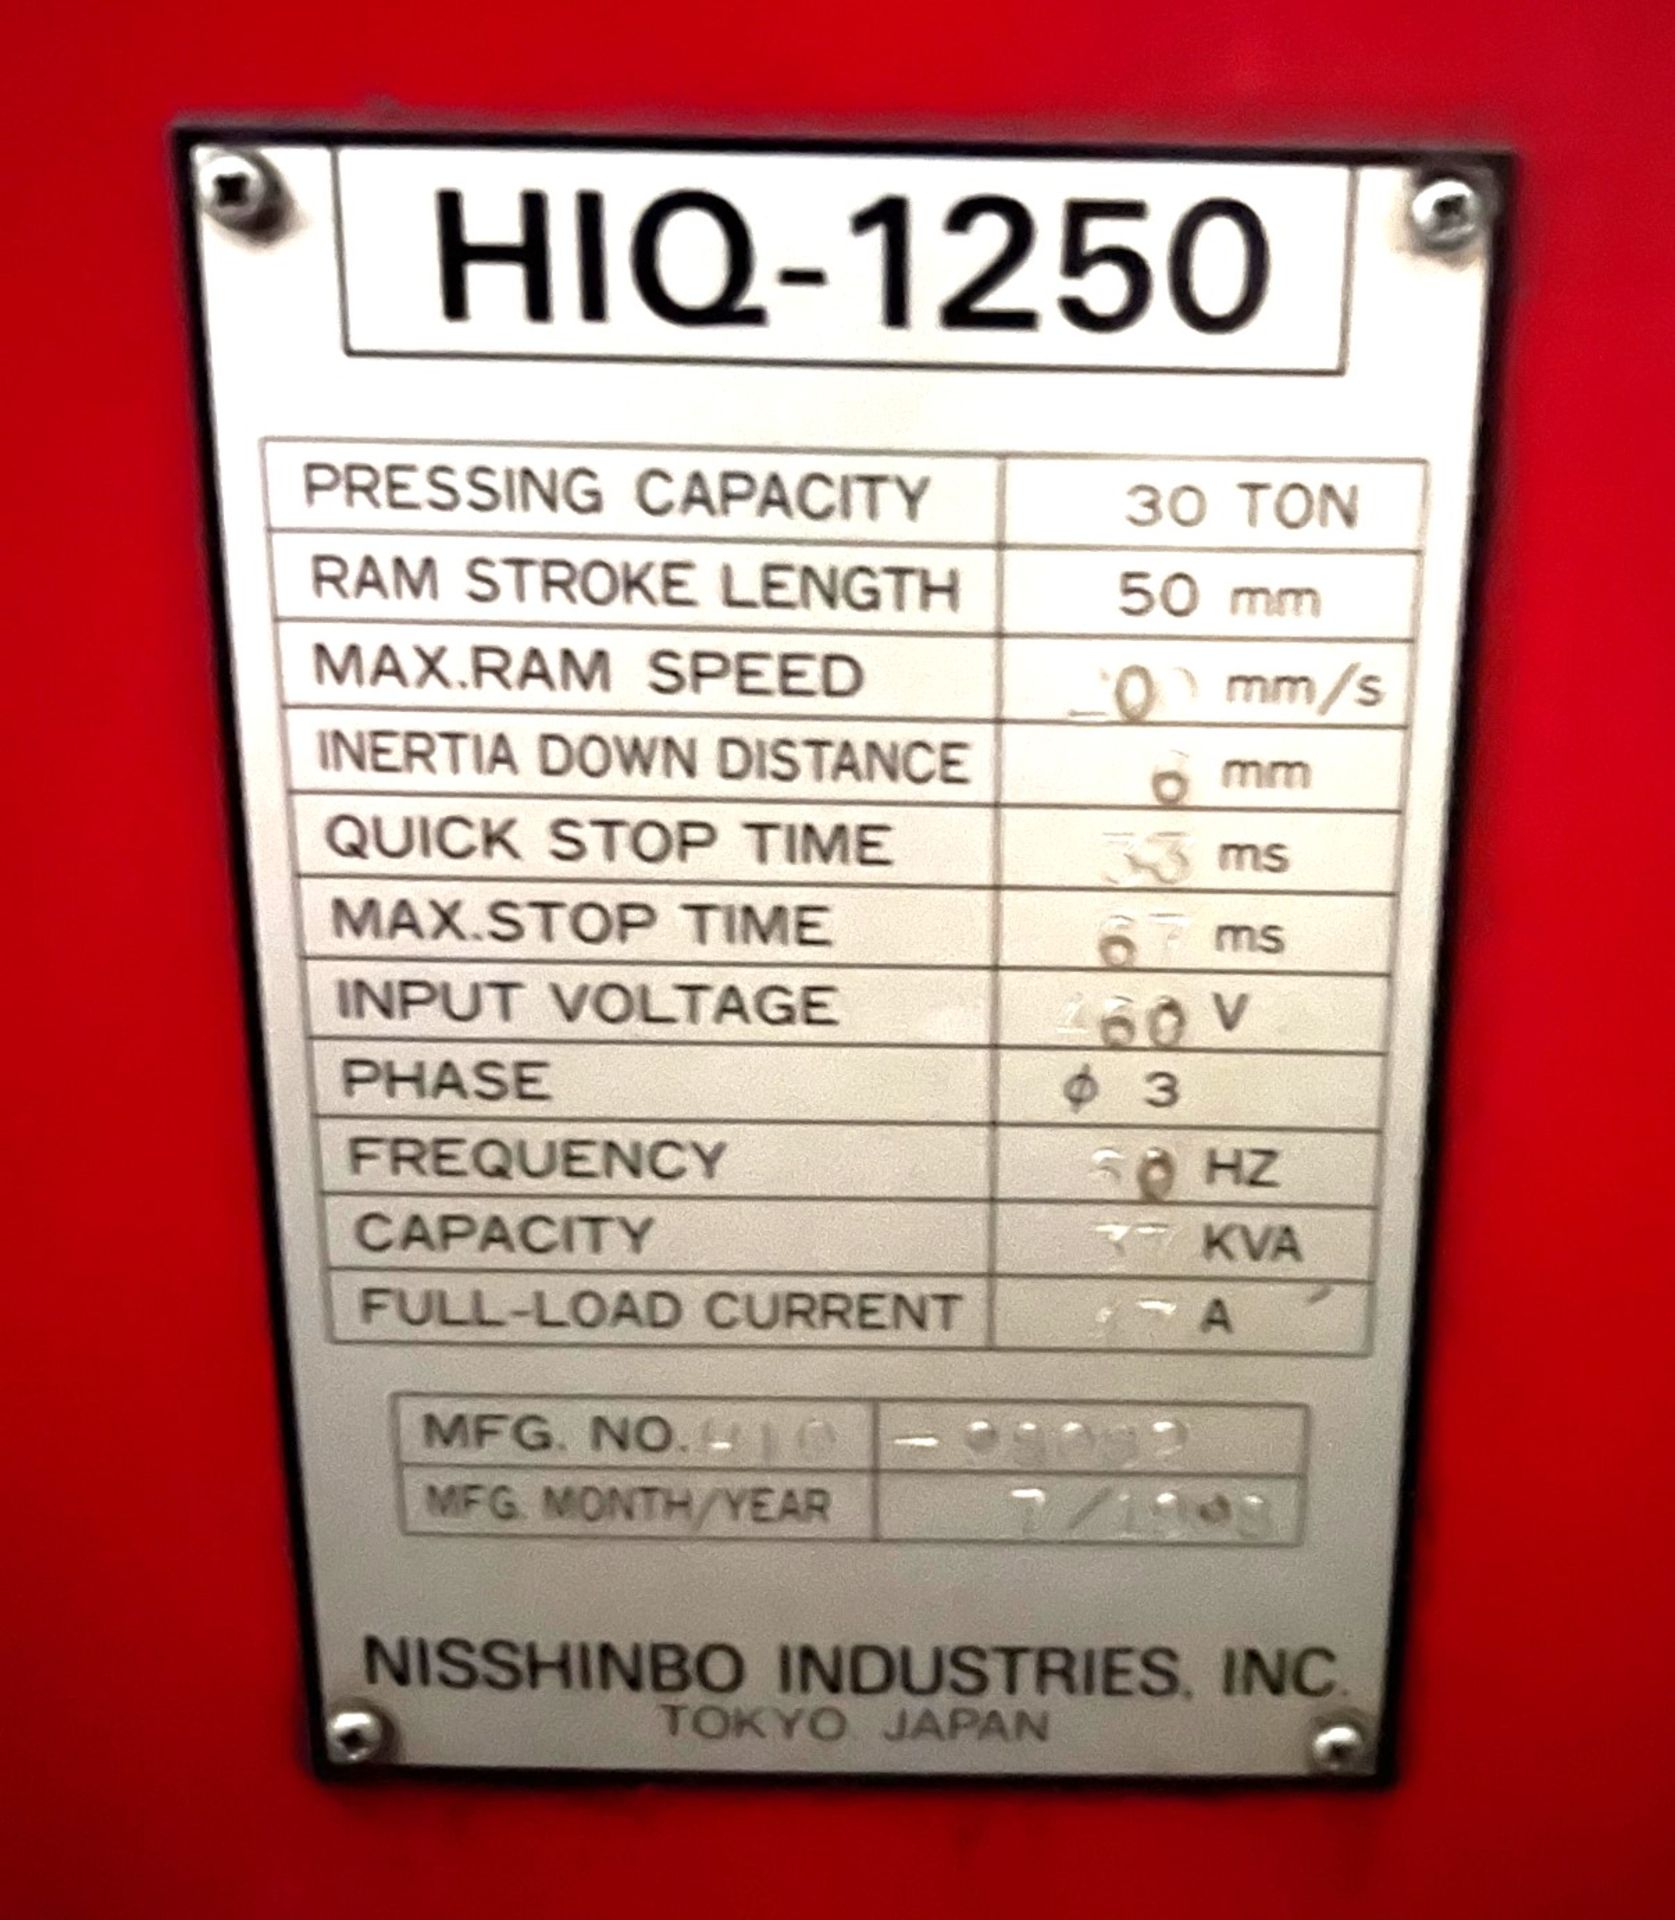 NISSHINBO HIQ-1250 CNC 30 TON TURRET PUNCH WITH 2 AUTO INDEX STATIONS AND LOADED WITH TOOLING - Image 9 of 18